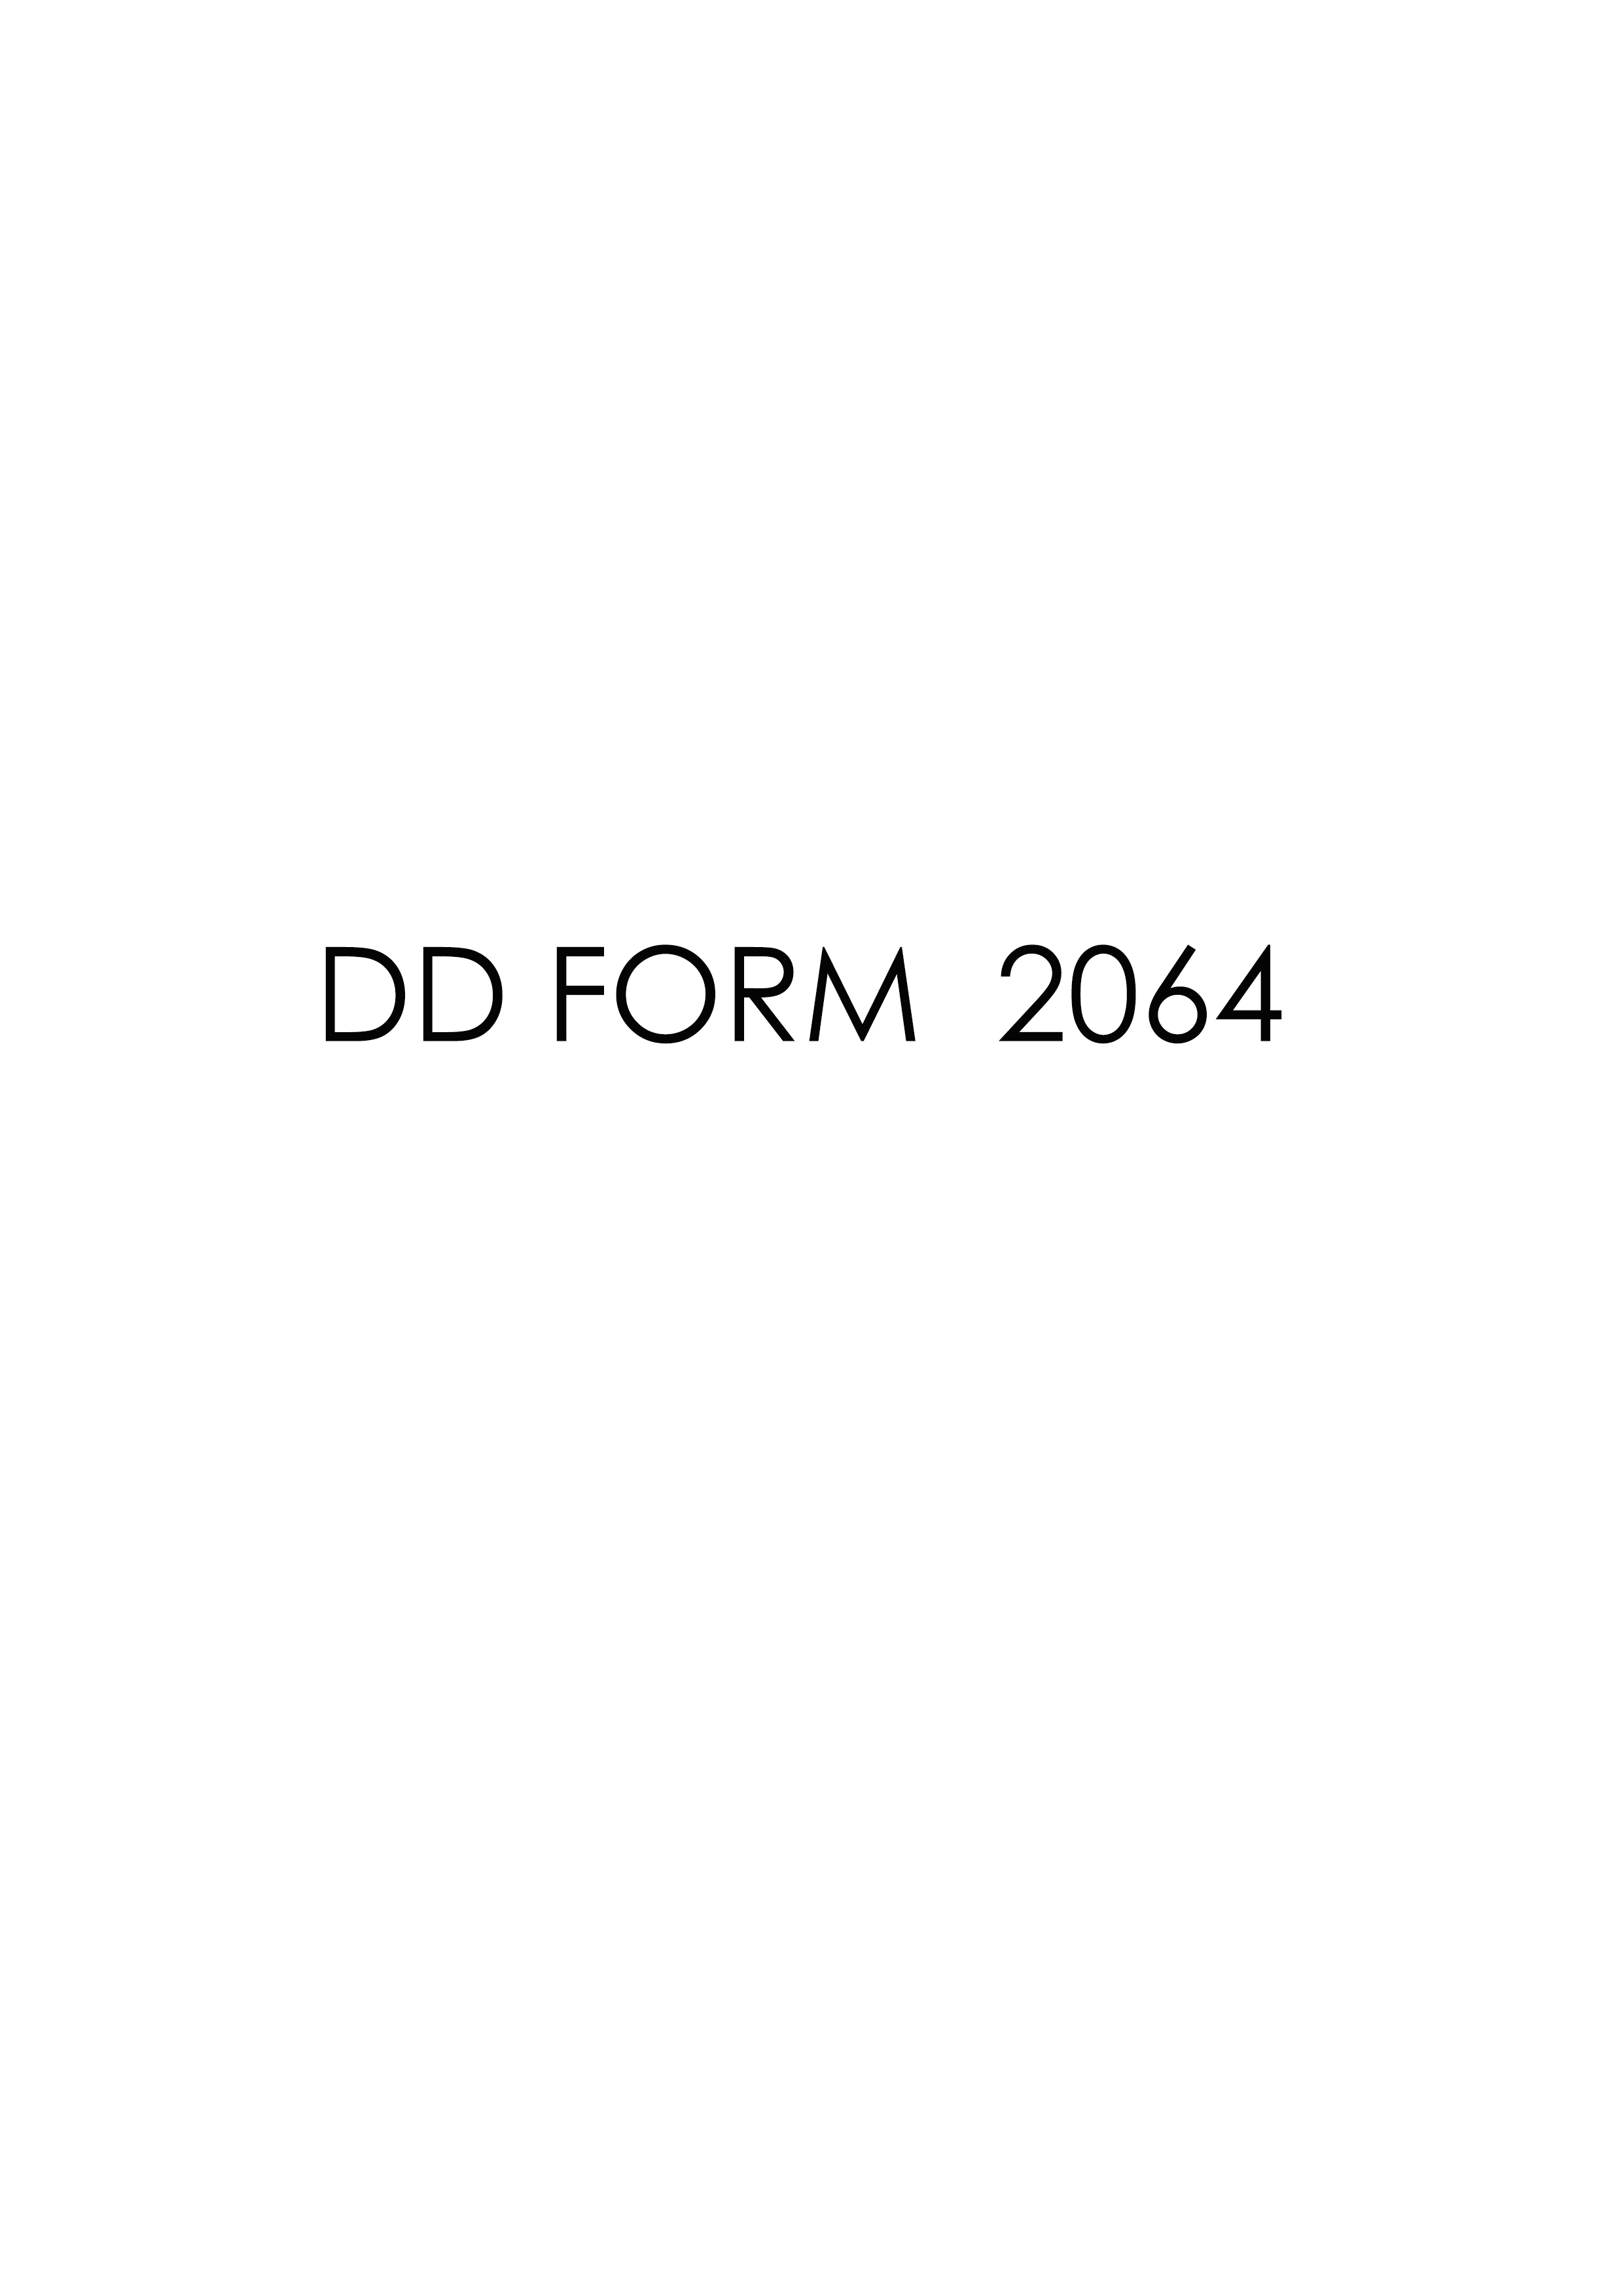 Download Fillable dd Form 2064